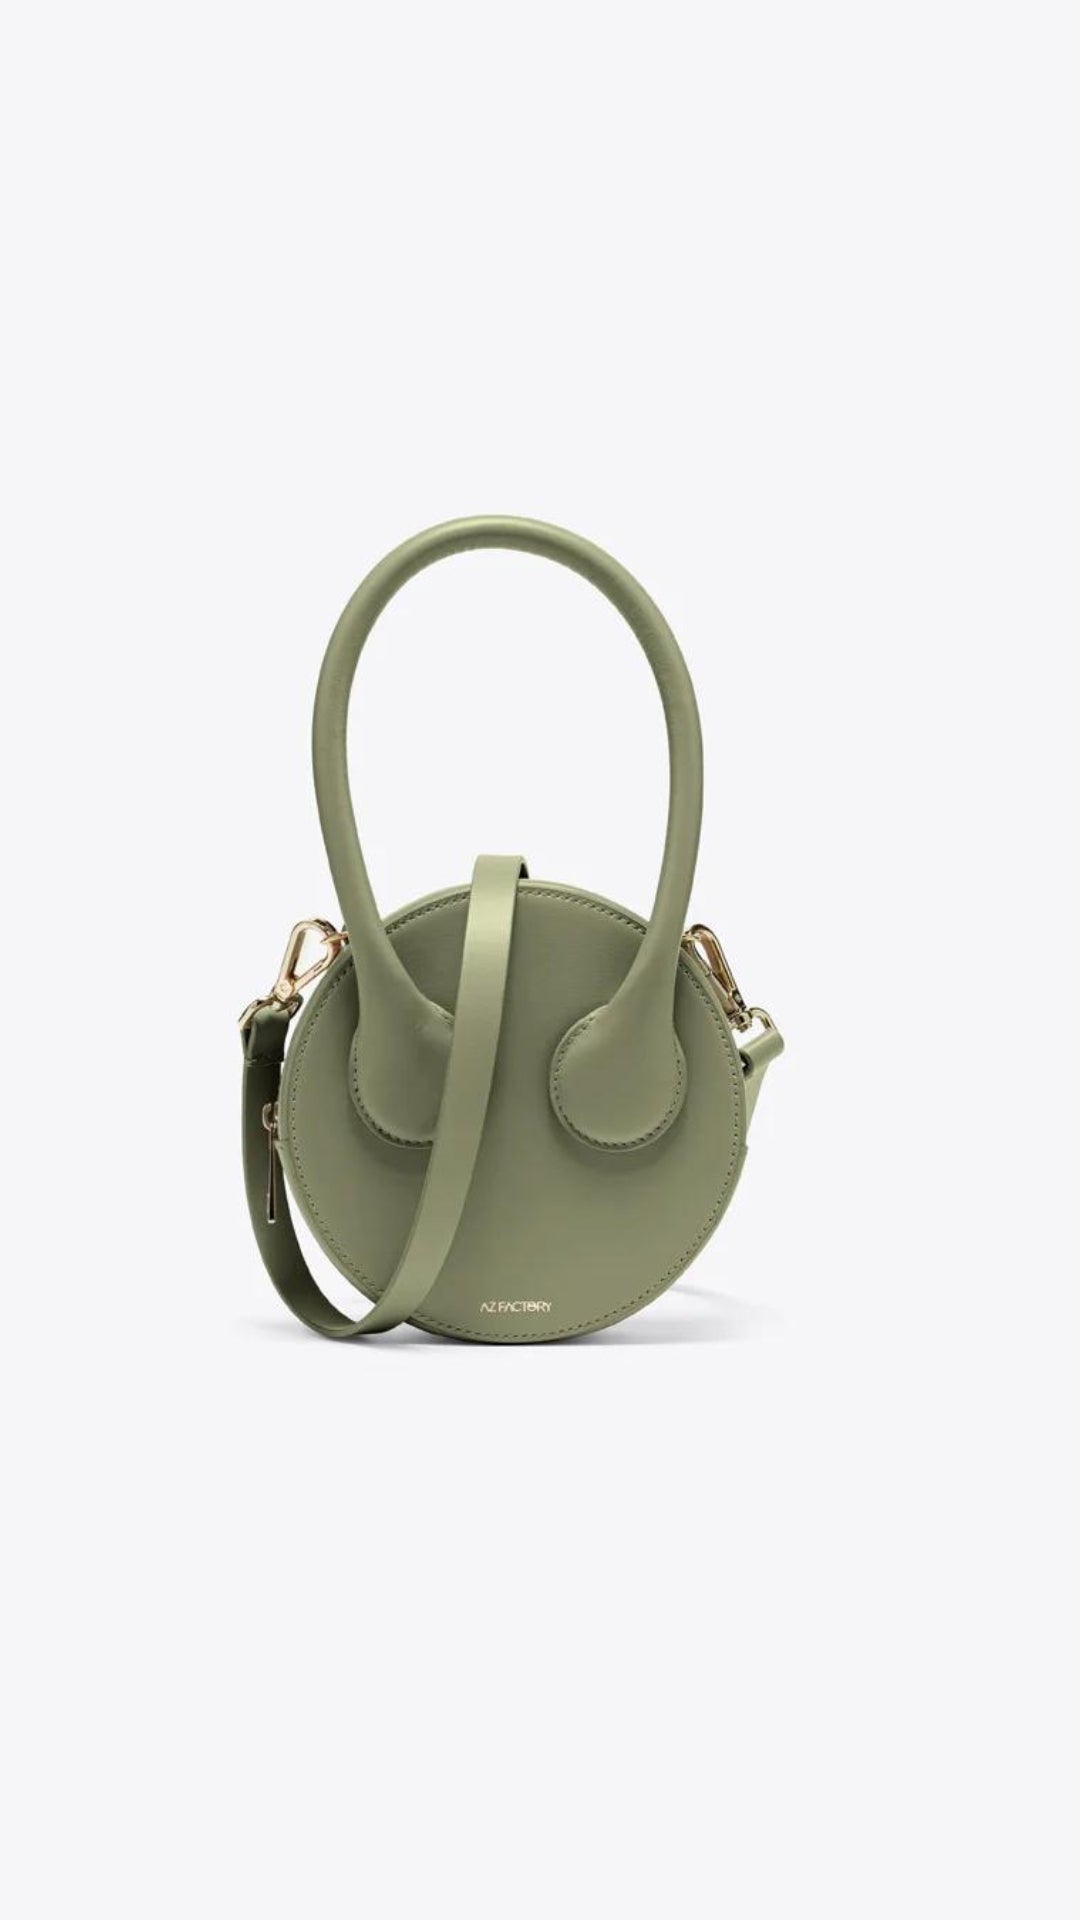 AZ Factory Round Cake Bag in Light Khaki Handcrafted in Italy with sustainable overstock leather, this bag features our AZ Amigo face design, a single extended top handle, and an attachable and adjustable leather cross-body strap. Complete with a zip closure and back pocket. Front view.